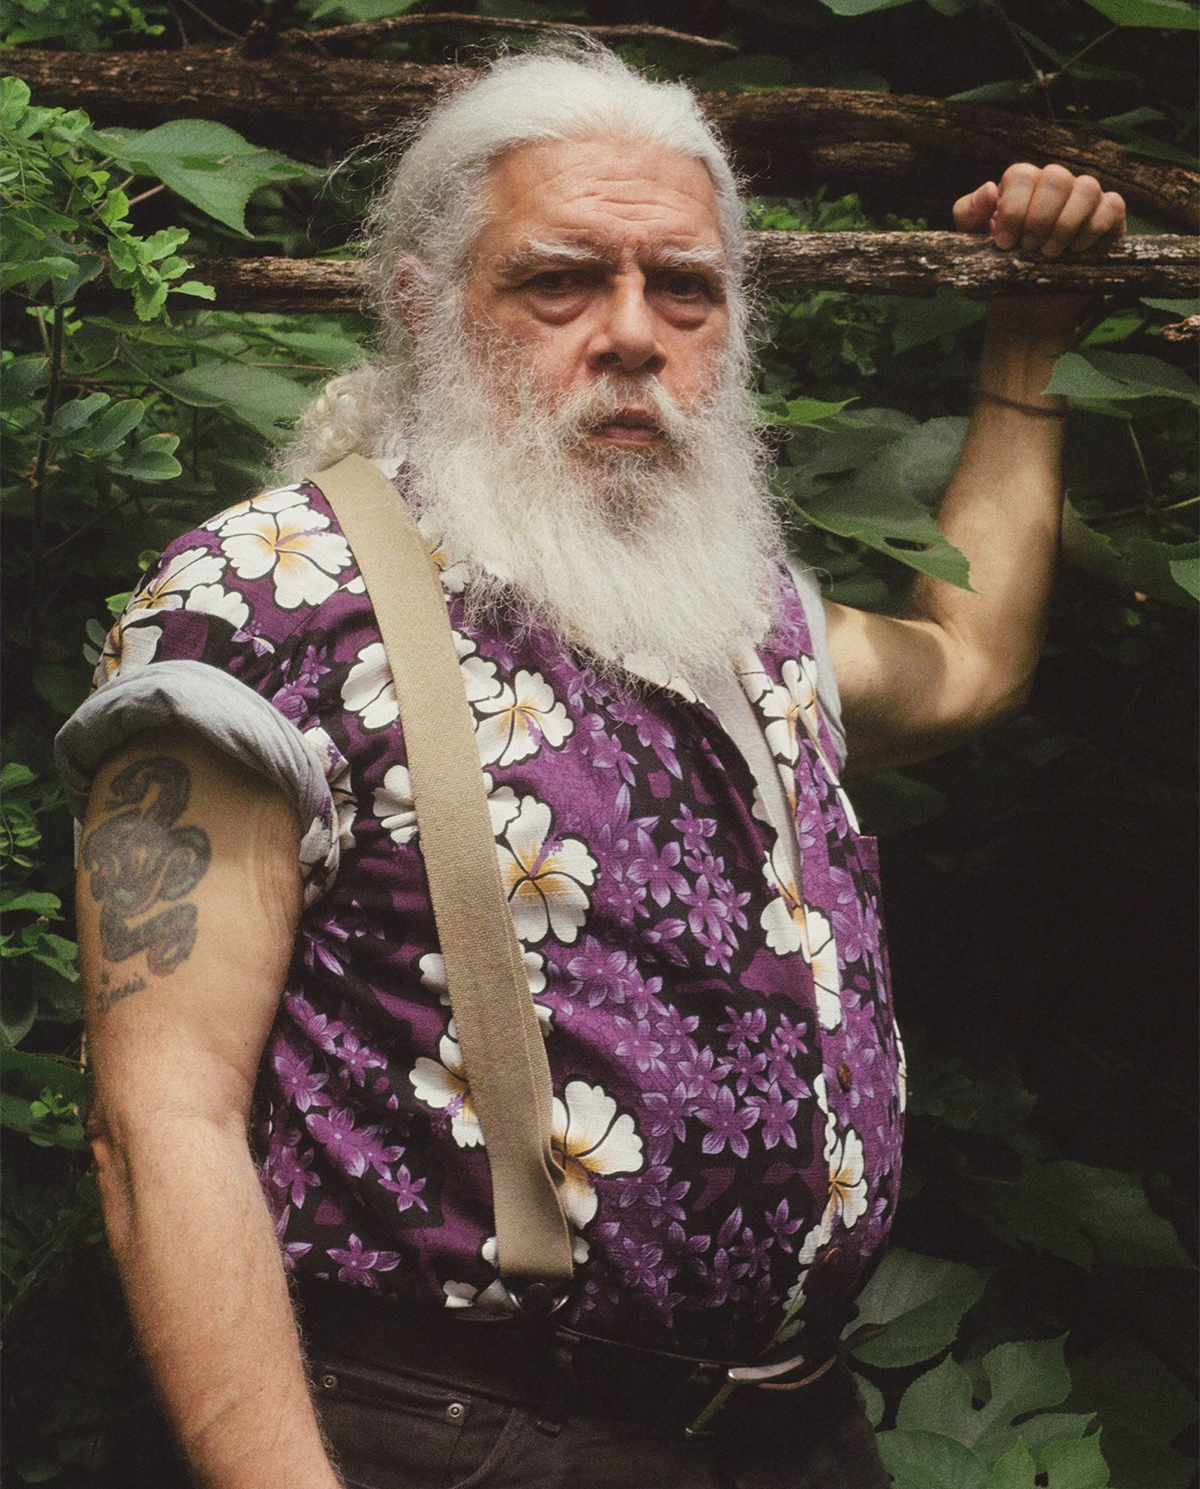 Samuel R. Delany, science fiction author at the Milford Readers and Writers Festival